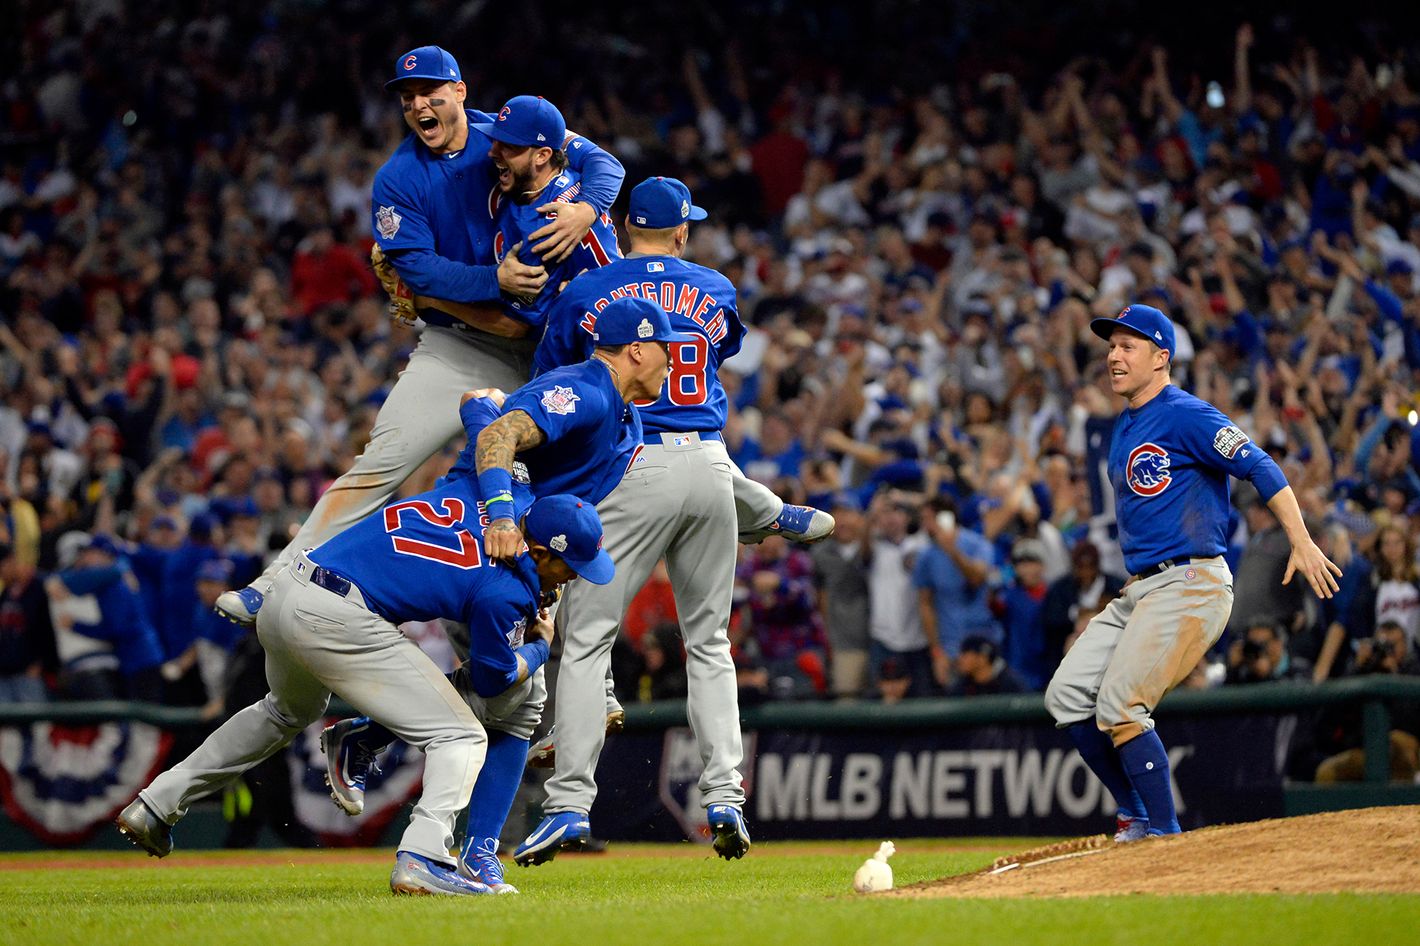 Cubs release one-time World Series champion